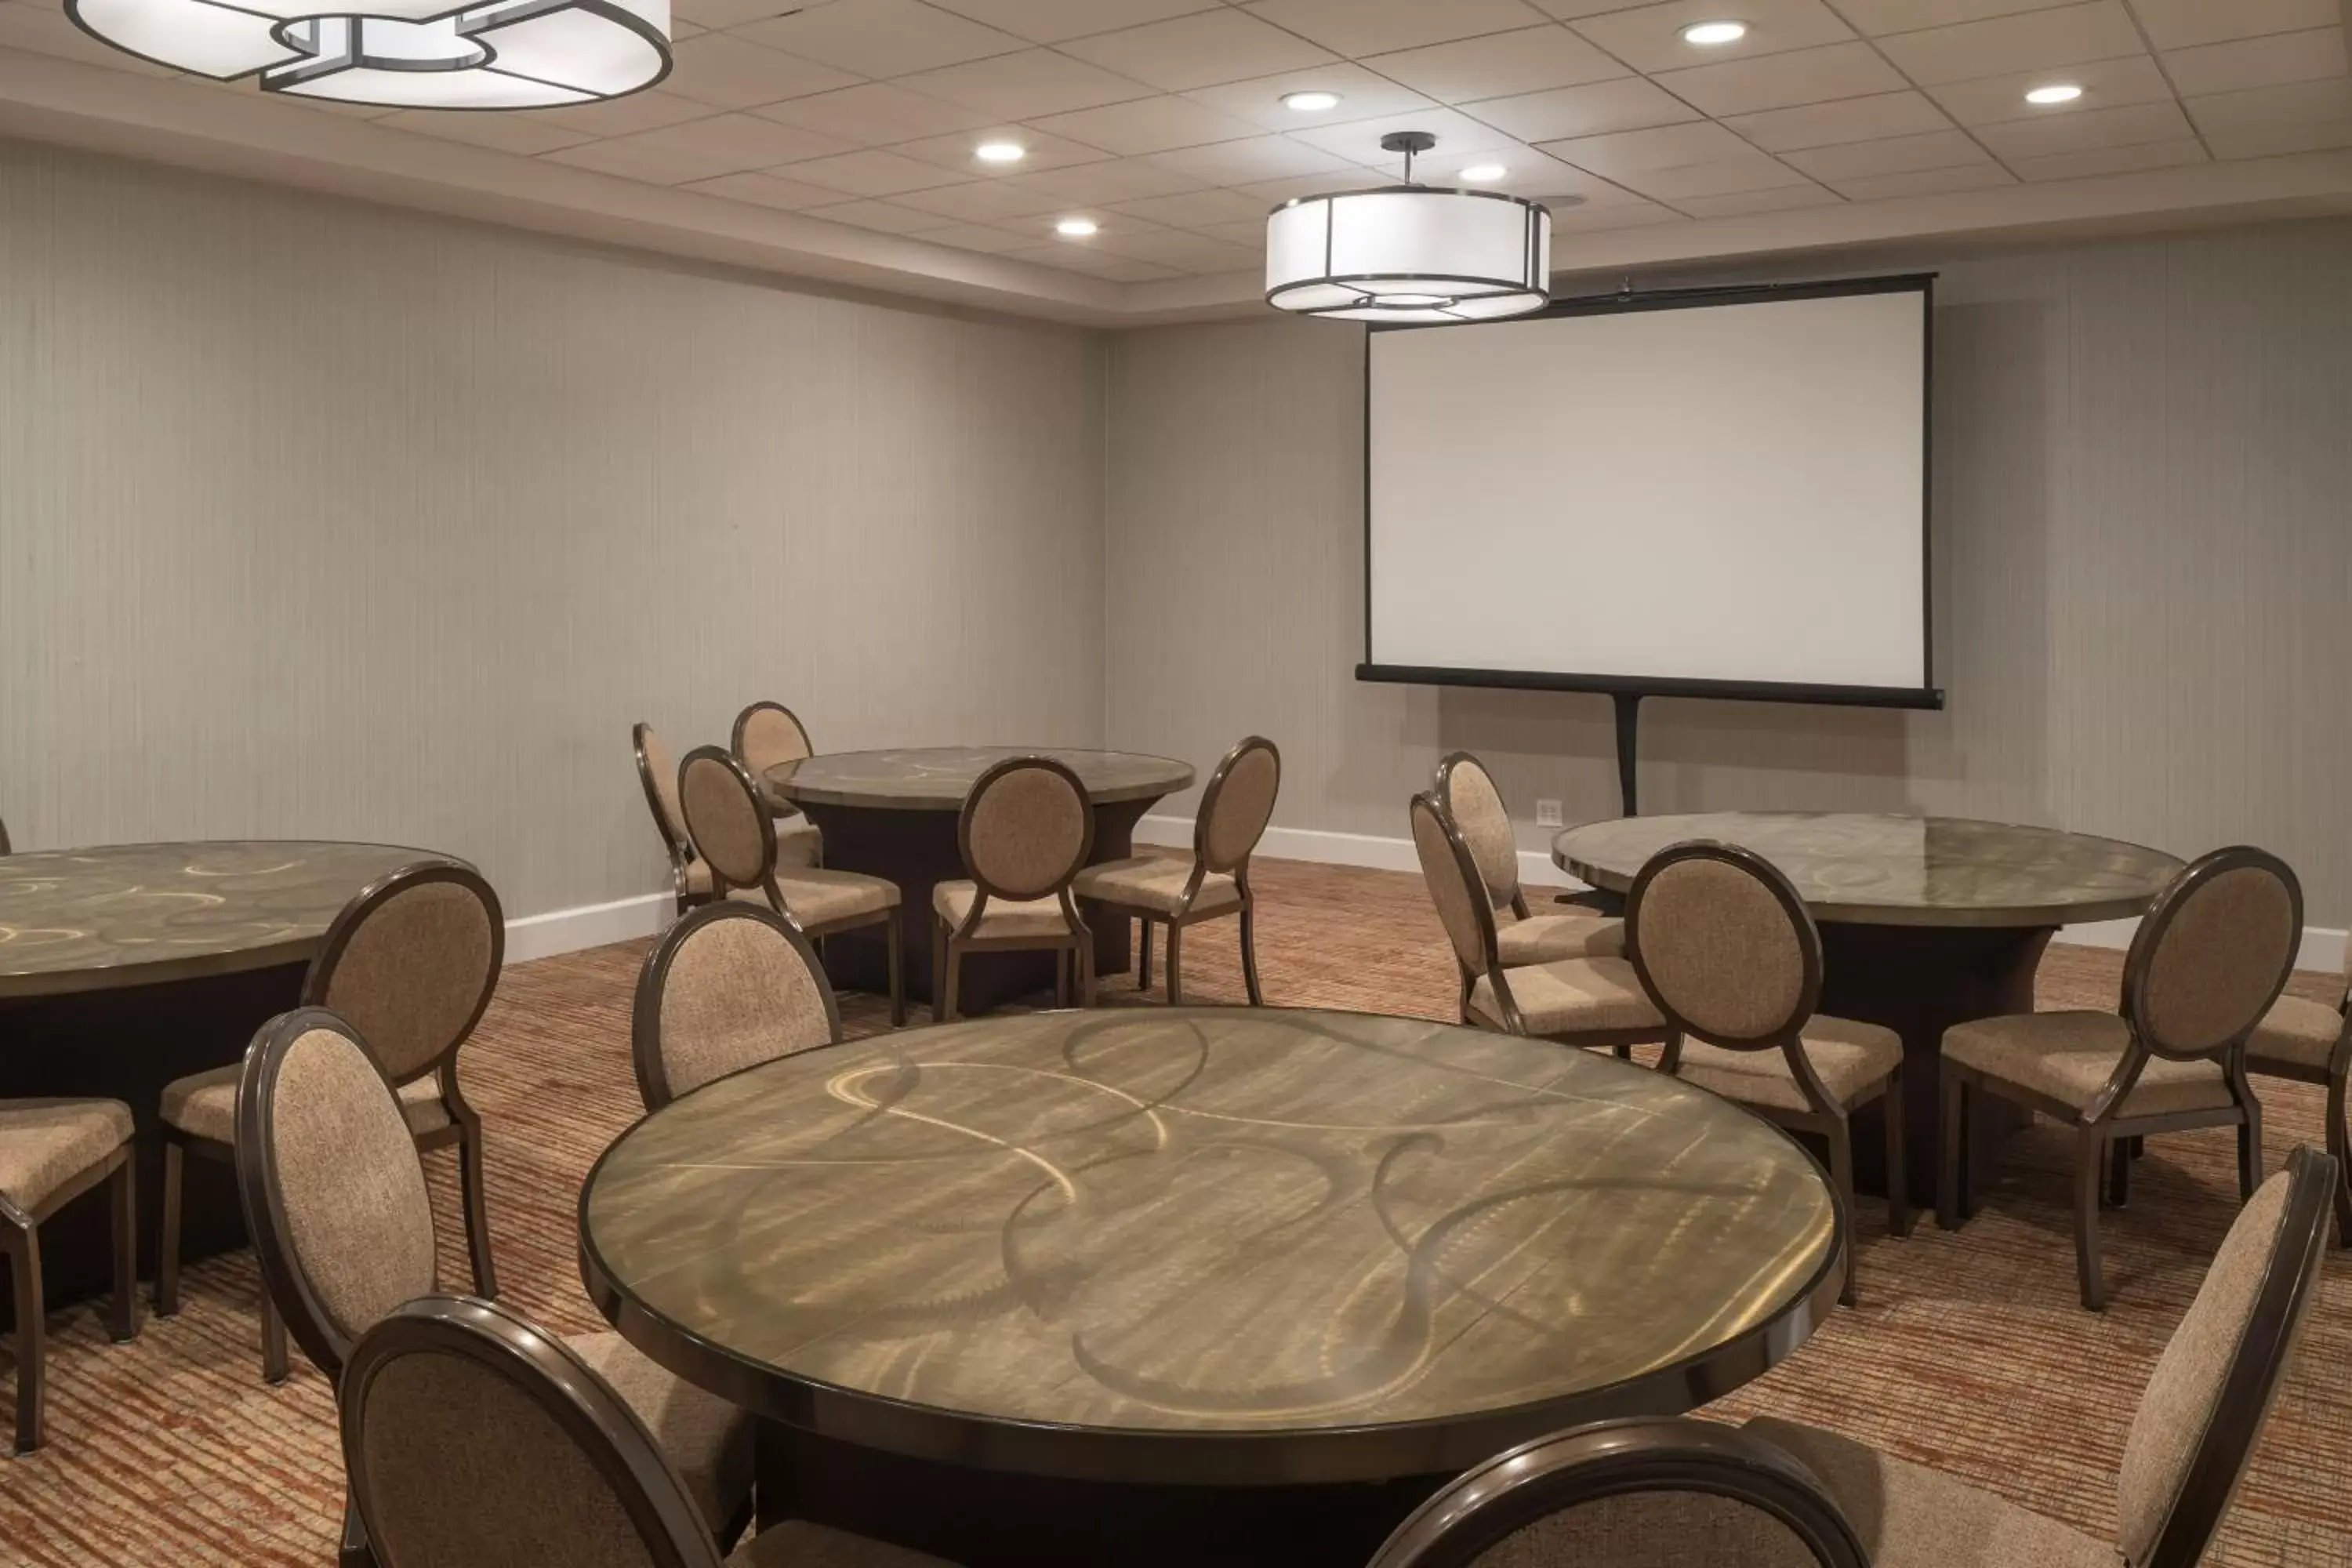 Meeting/conference room in Sheraton Dallas Hotel by the Galleria